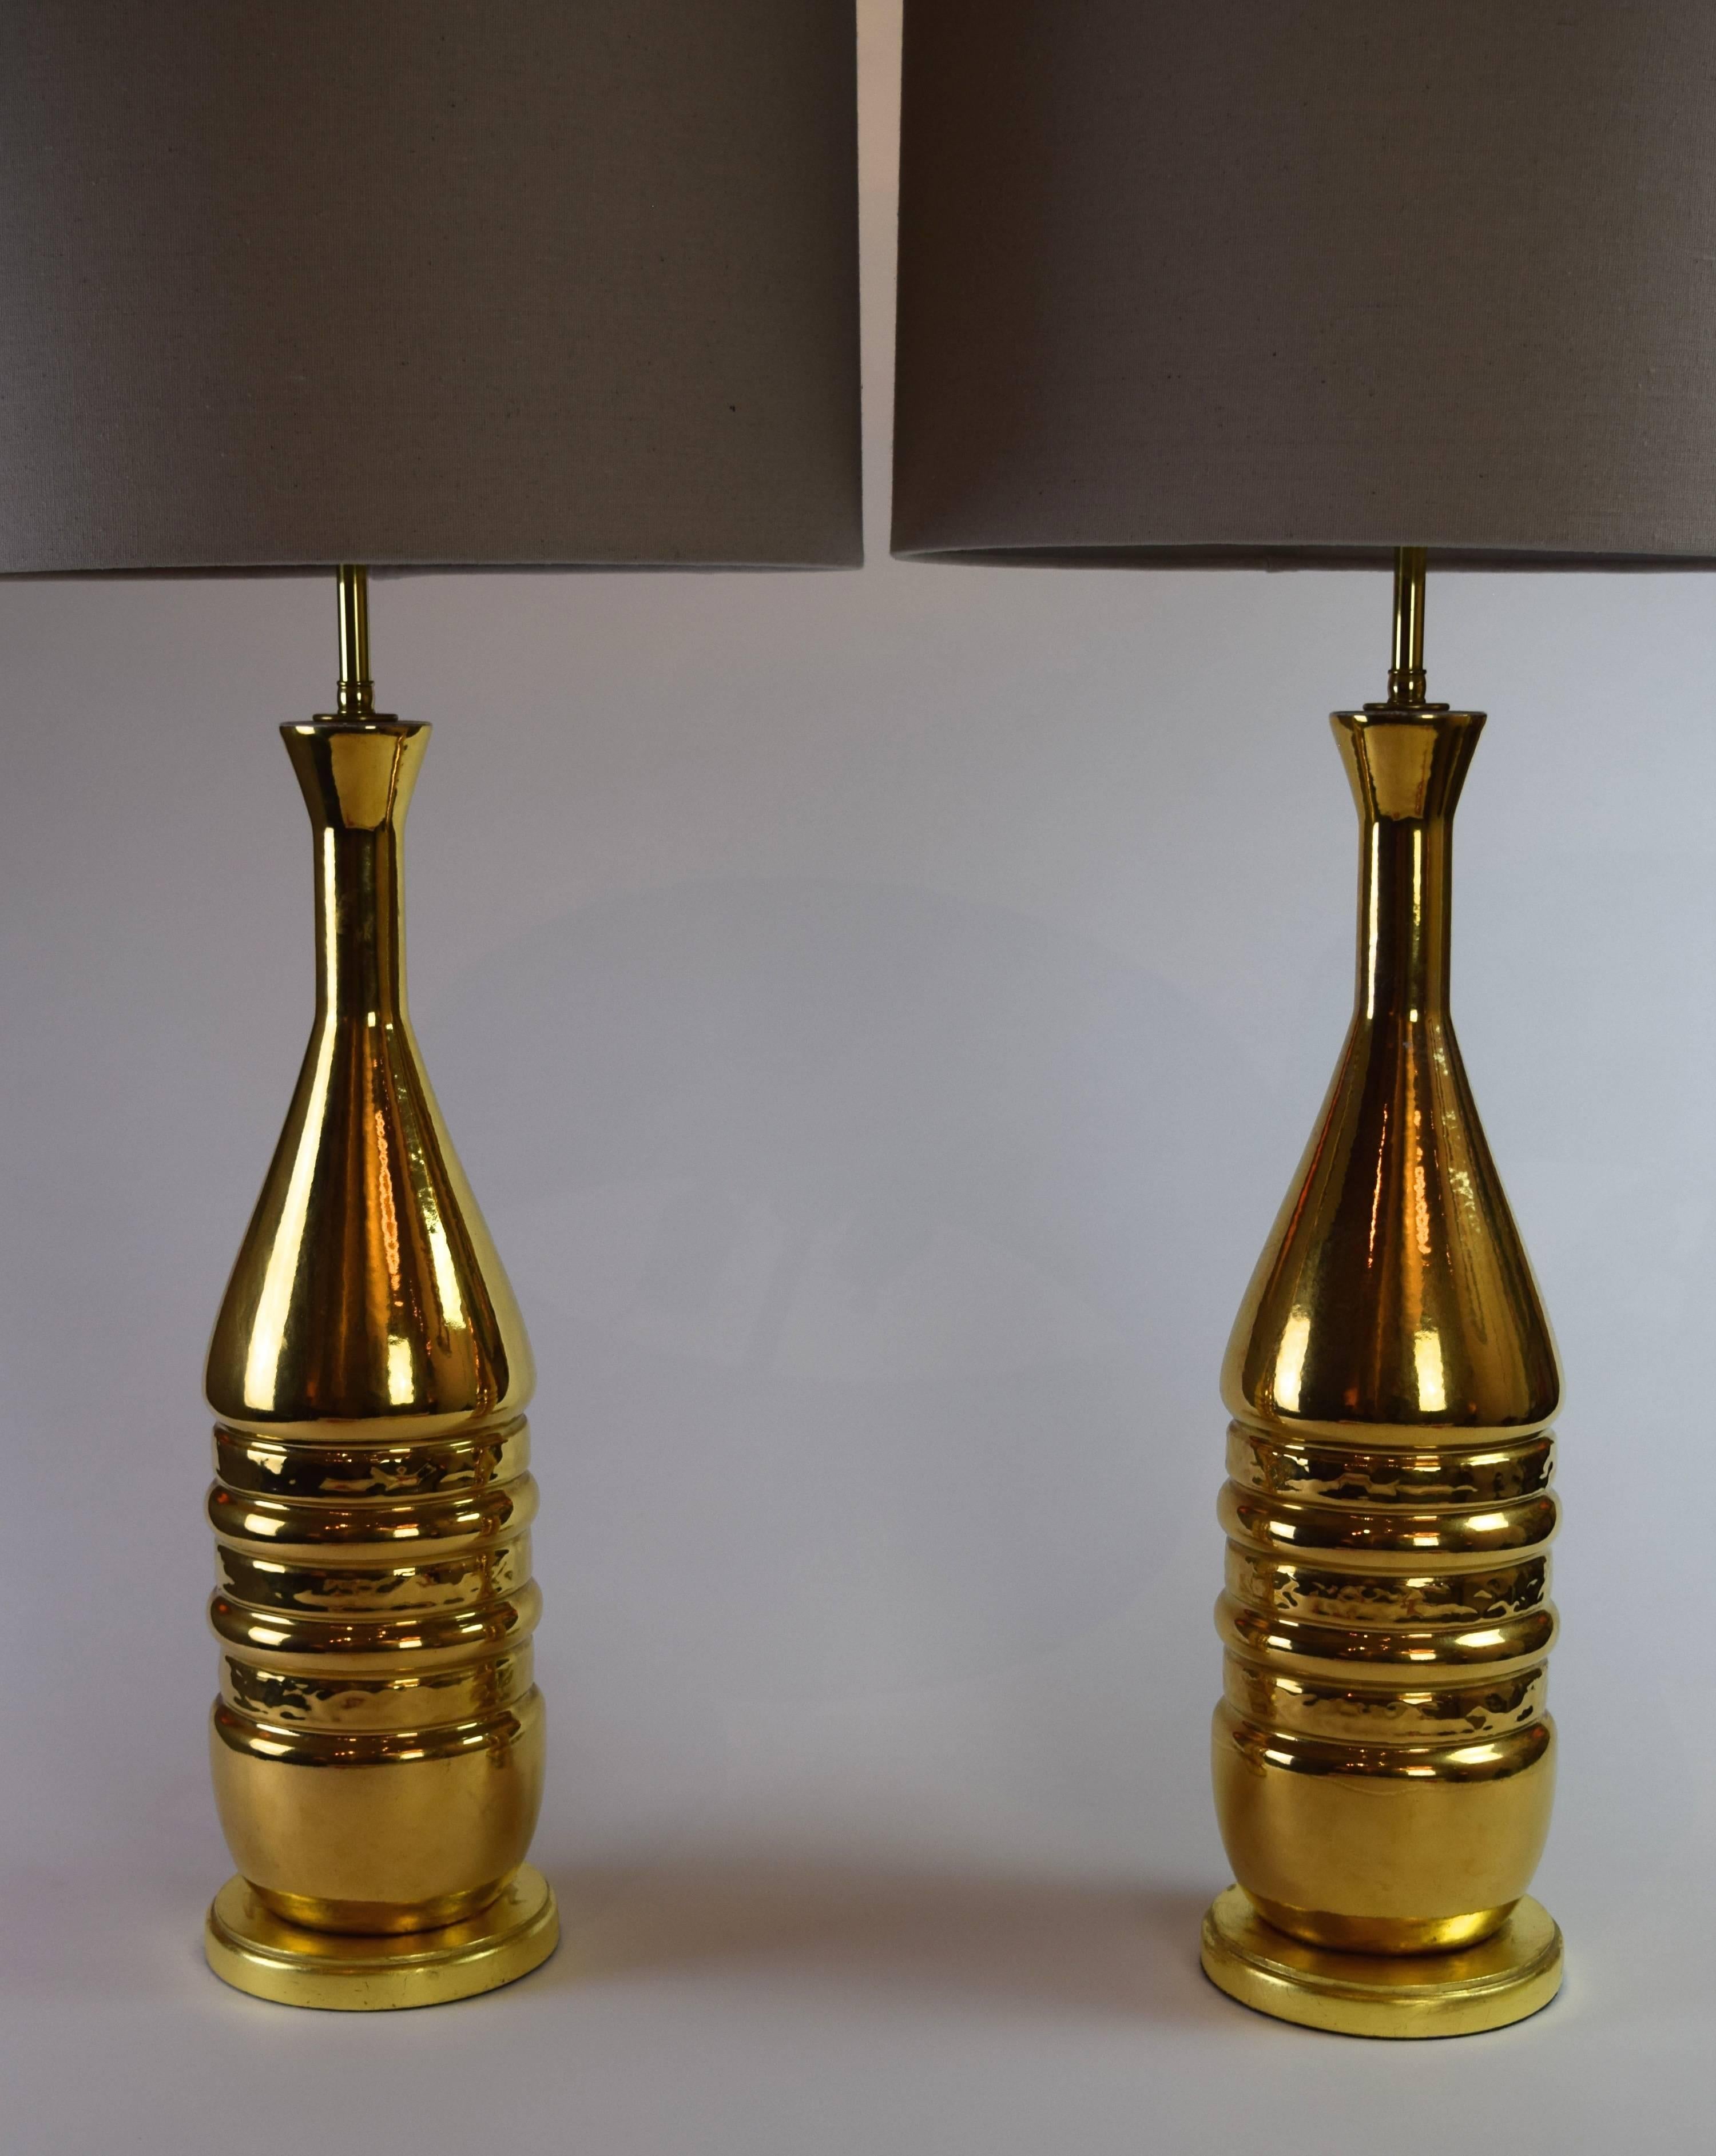 Pair of Tall Mid-Century Modern Gilt Ceramic Lamps In Good Condition For Sale In New York, NY